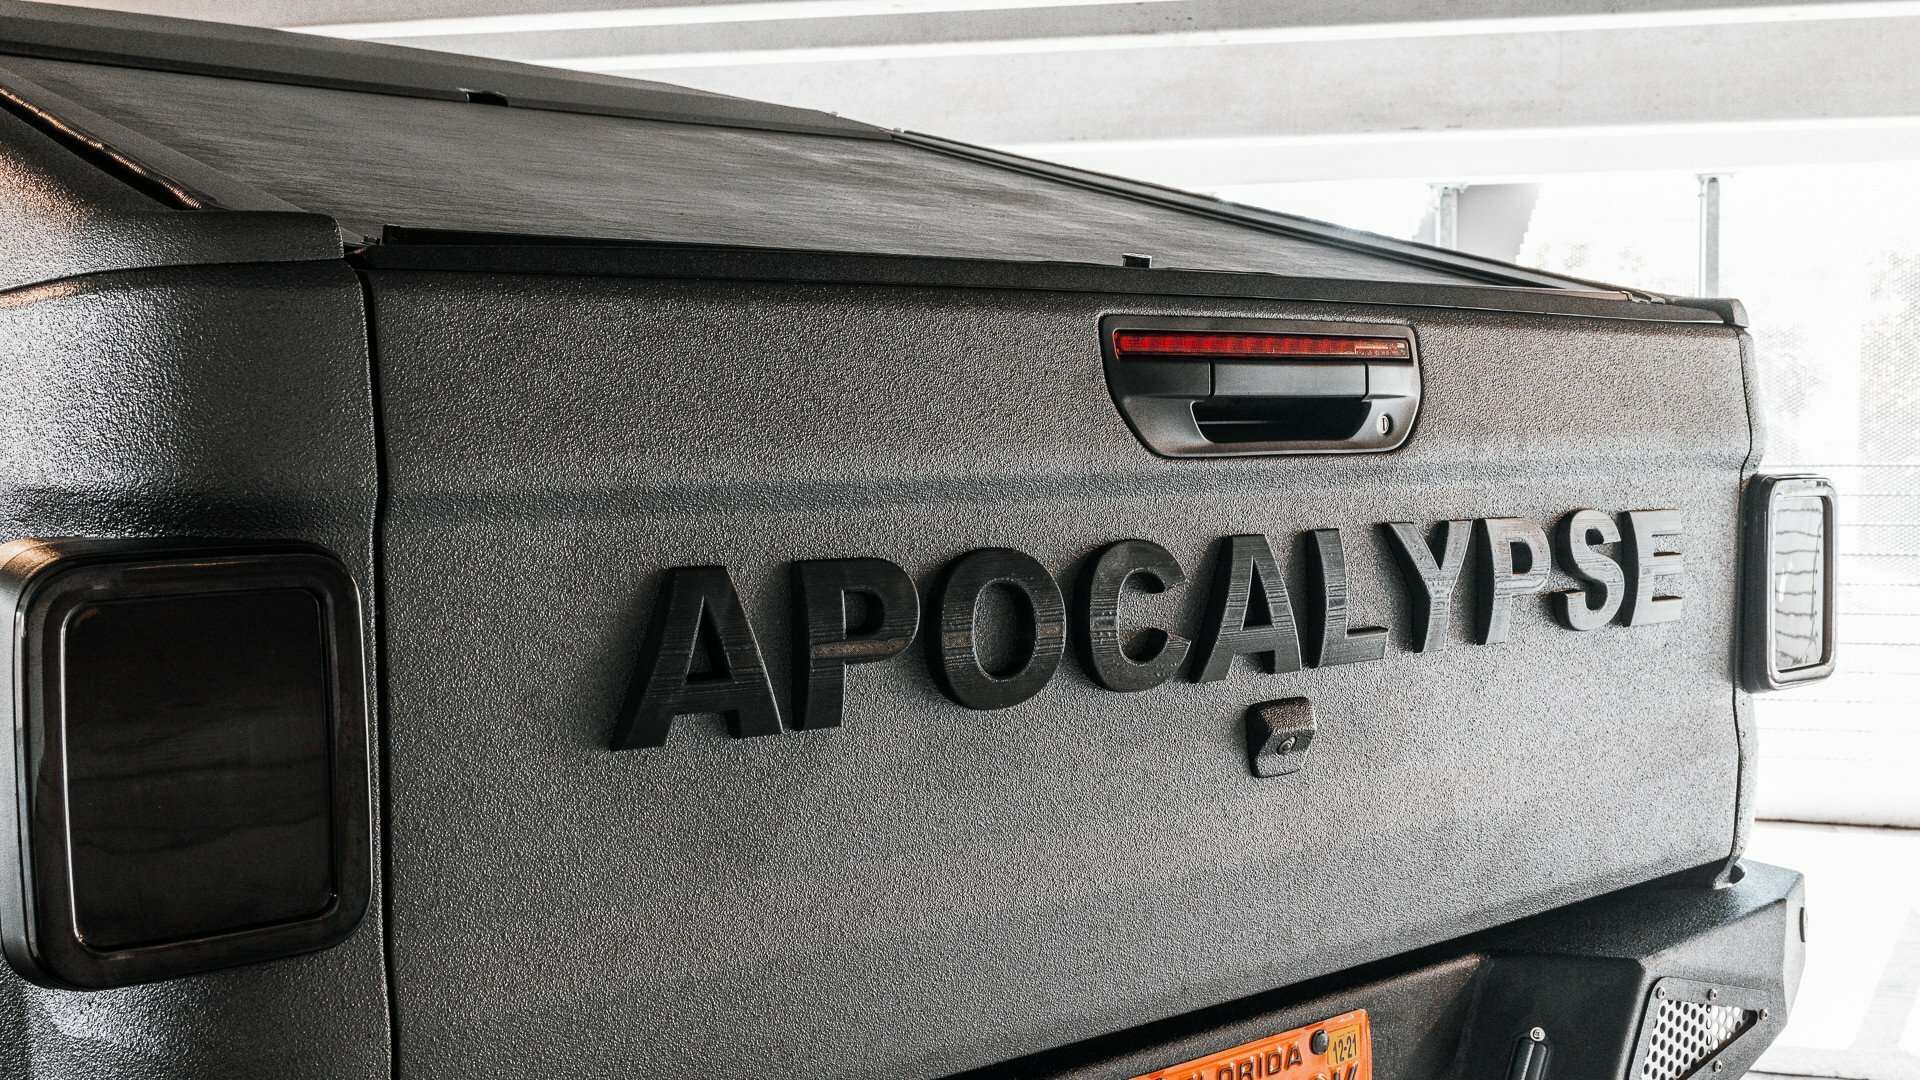 Apocalypse Hellfire 6x6 In Fort Lauderdale, Florida, United States